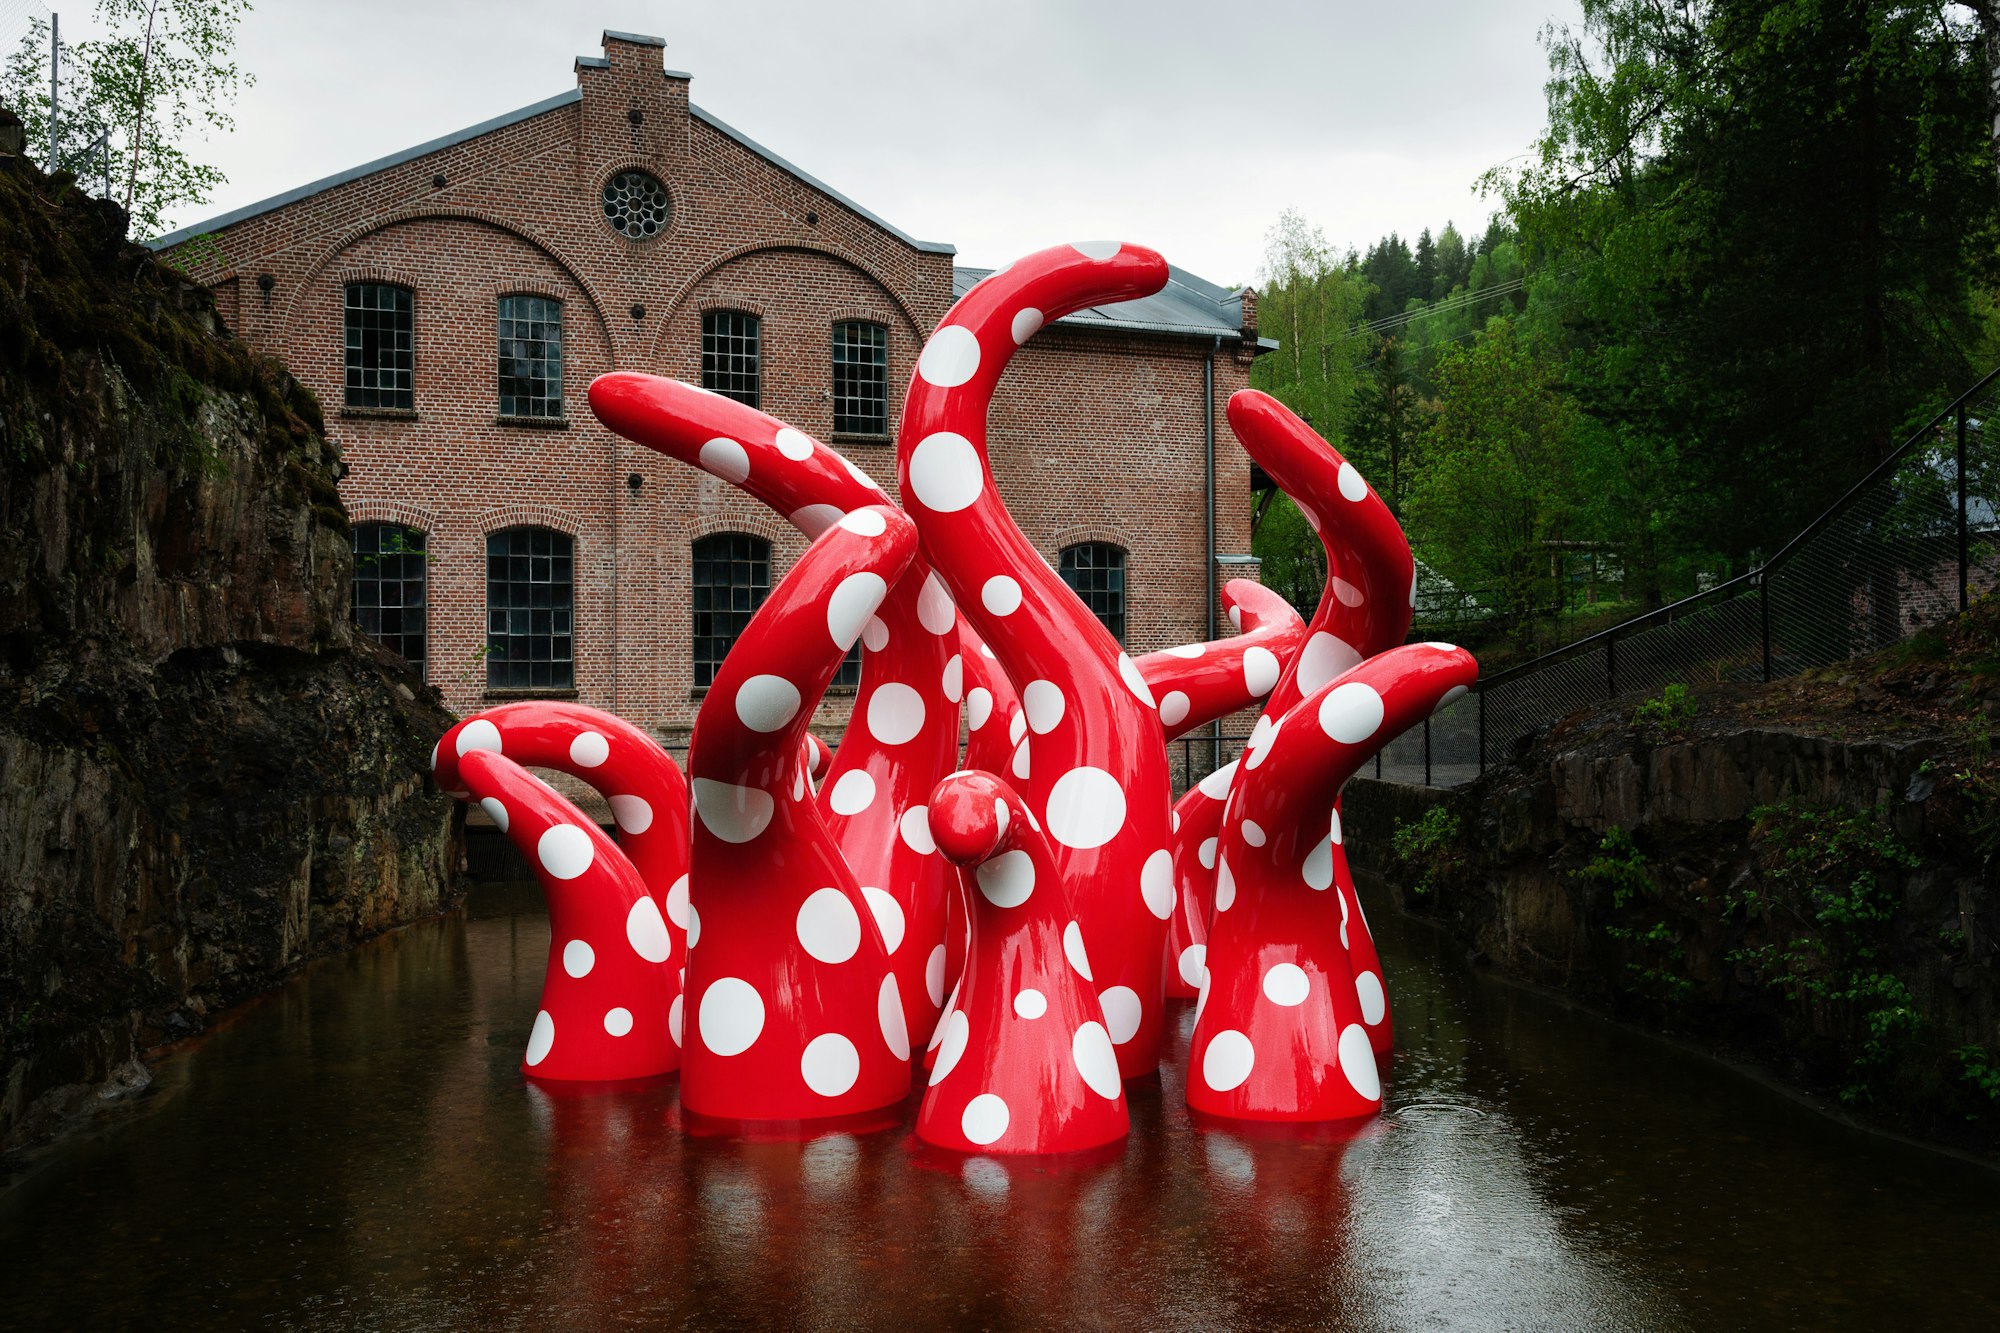 Sculpture by japaneese artist Yayoi Kusama showing octopuslike red and white dotty arms emerging up from the water.